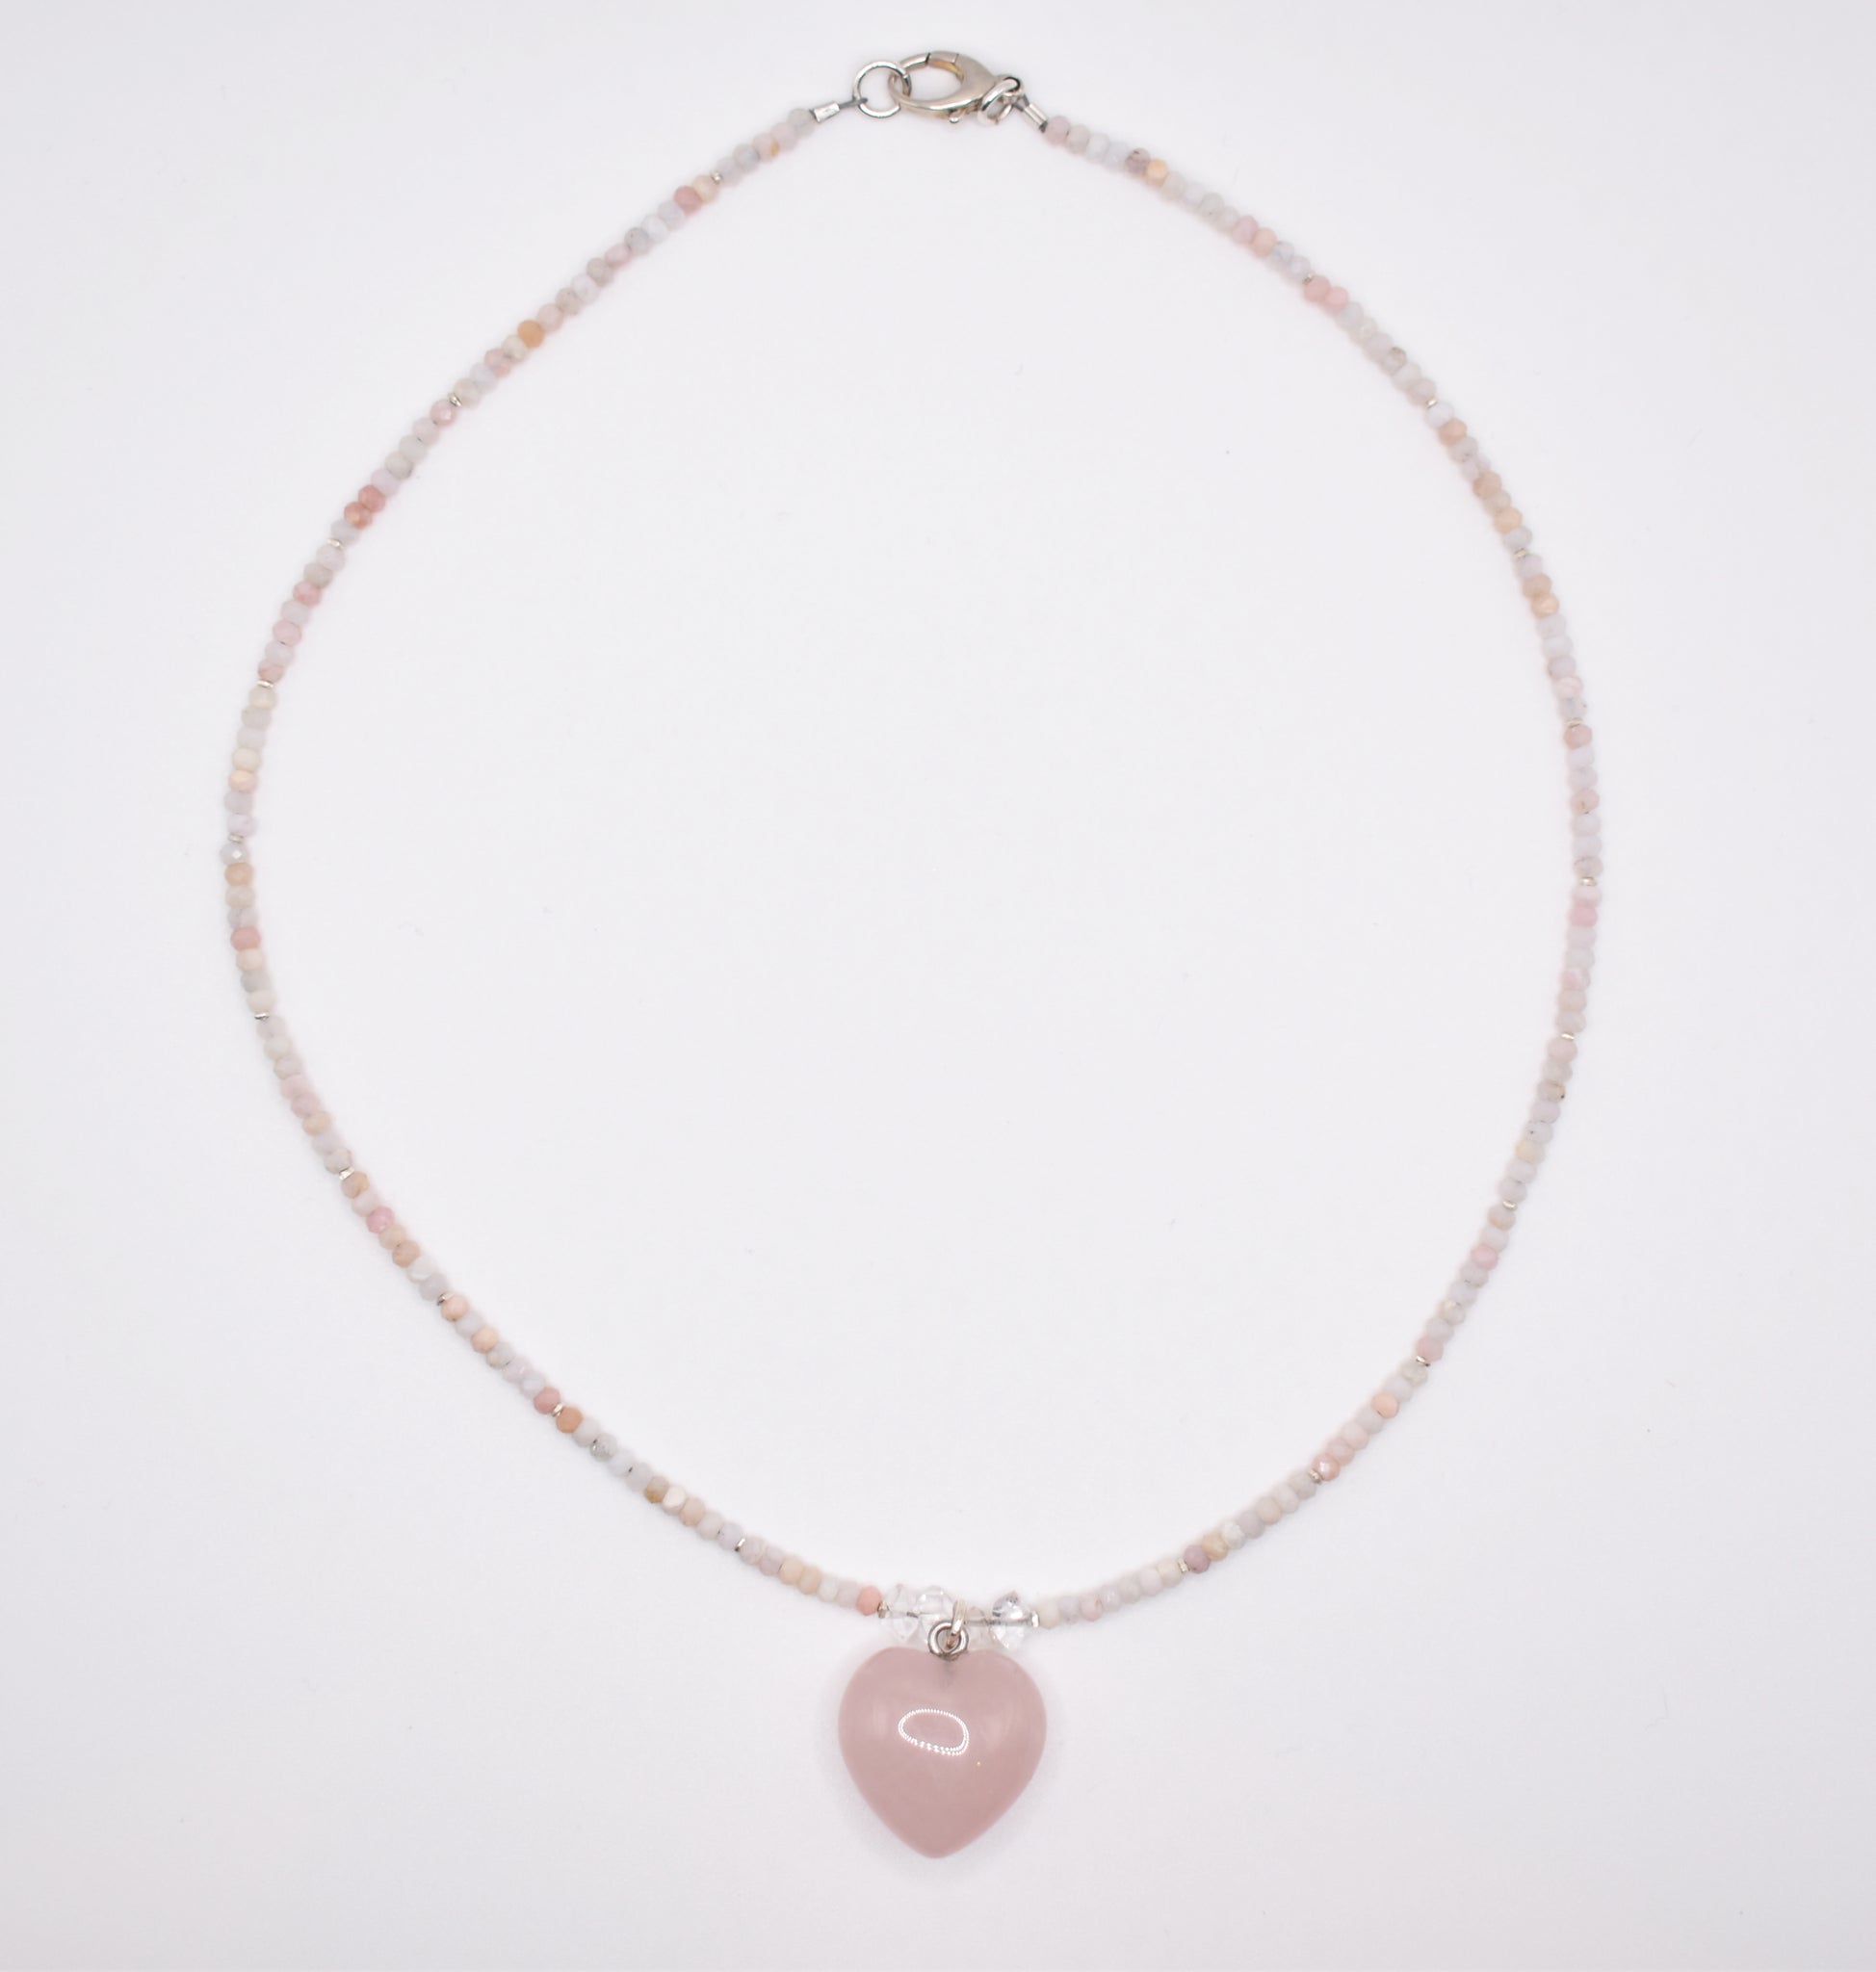 Poppy Pink Opal and Rose Quartz Heart Necklace